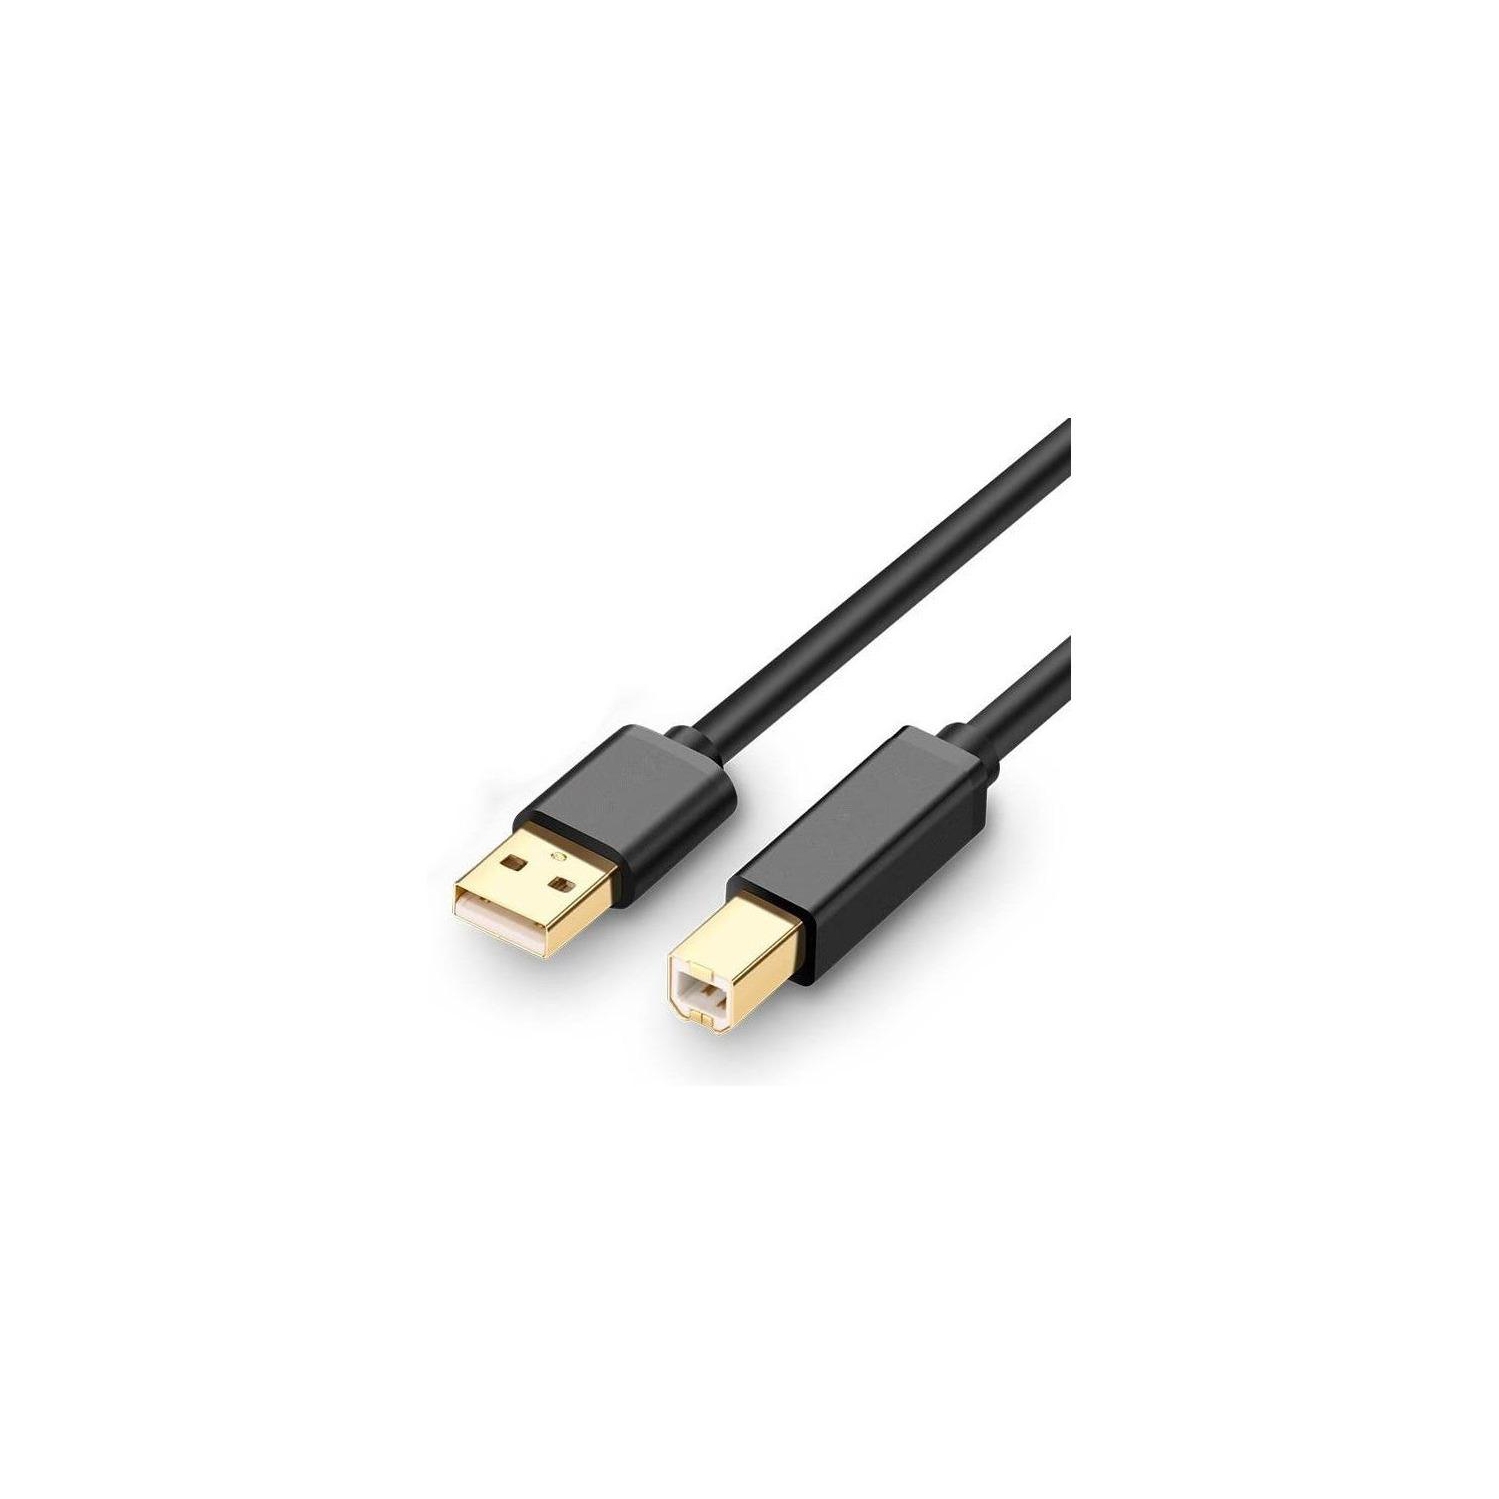 UGREEN Printer Cable USB 2.0 Type A Male to B Male Scanner Cord High Speed for , HP, Canon, Lexmark,&More (15ft/5m)